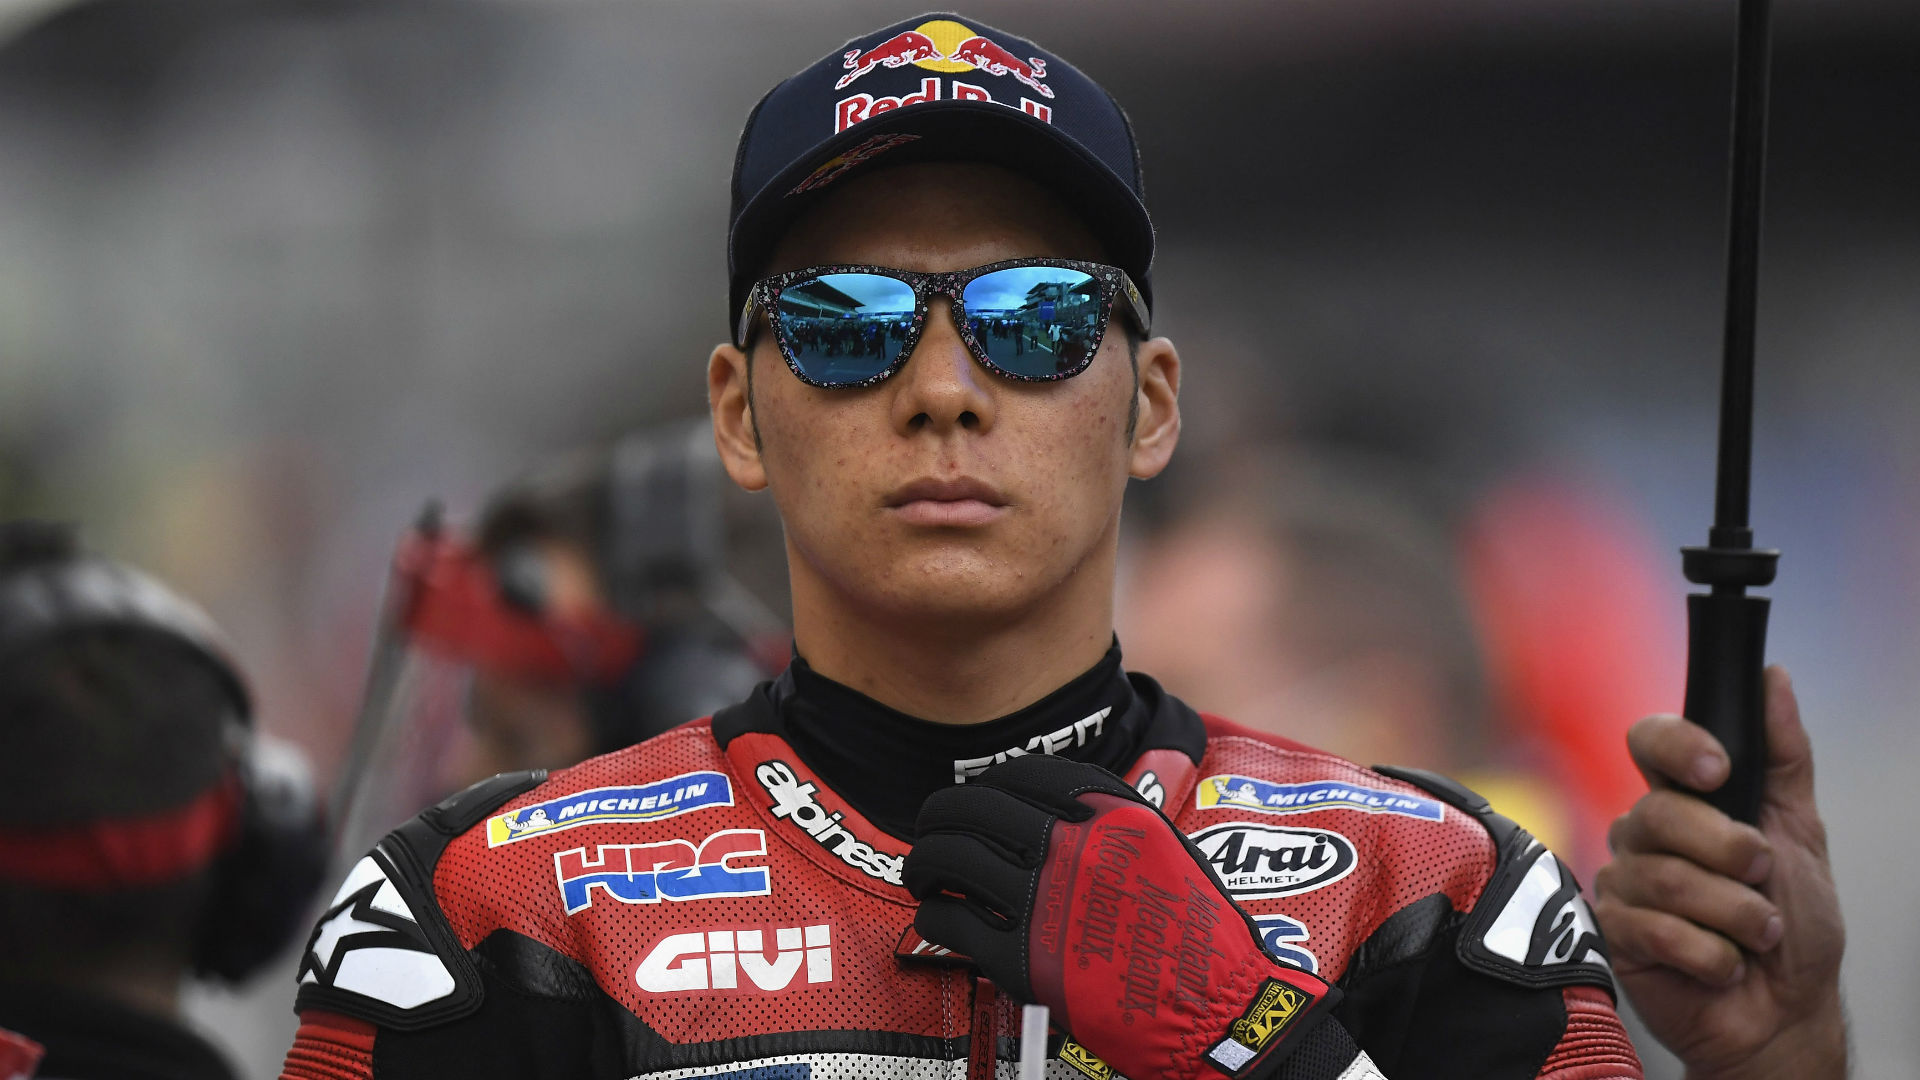 LCR Honda will have Takaaki Nakagami back again for the 2021 season, as the Japanese rider teams up with Alex Marquez.